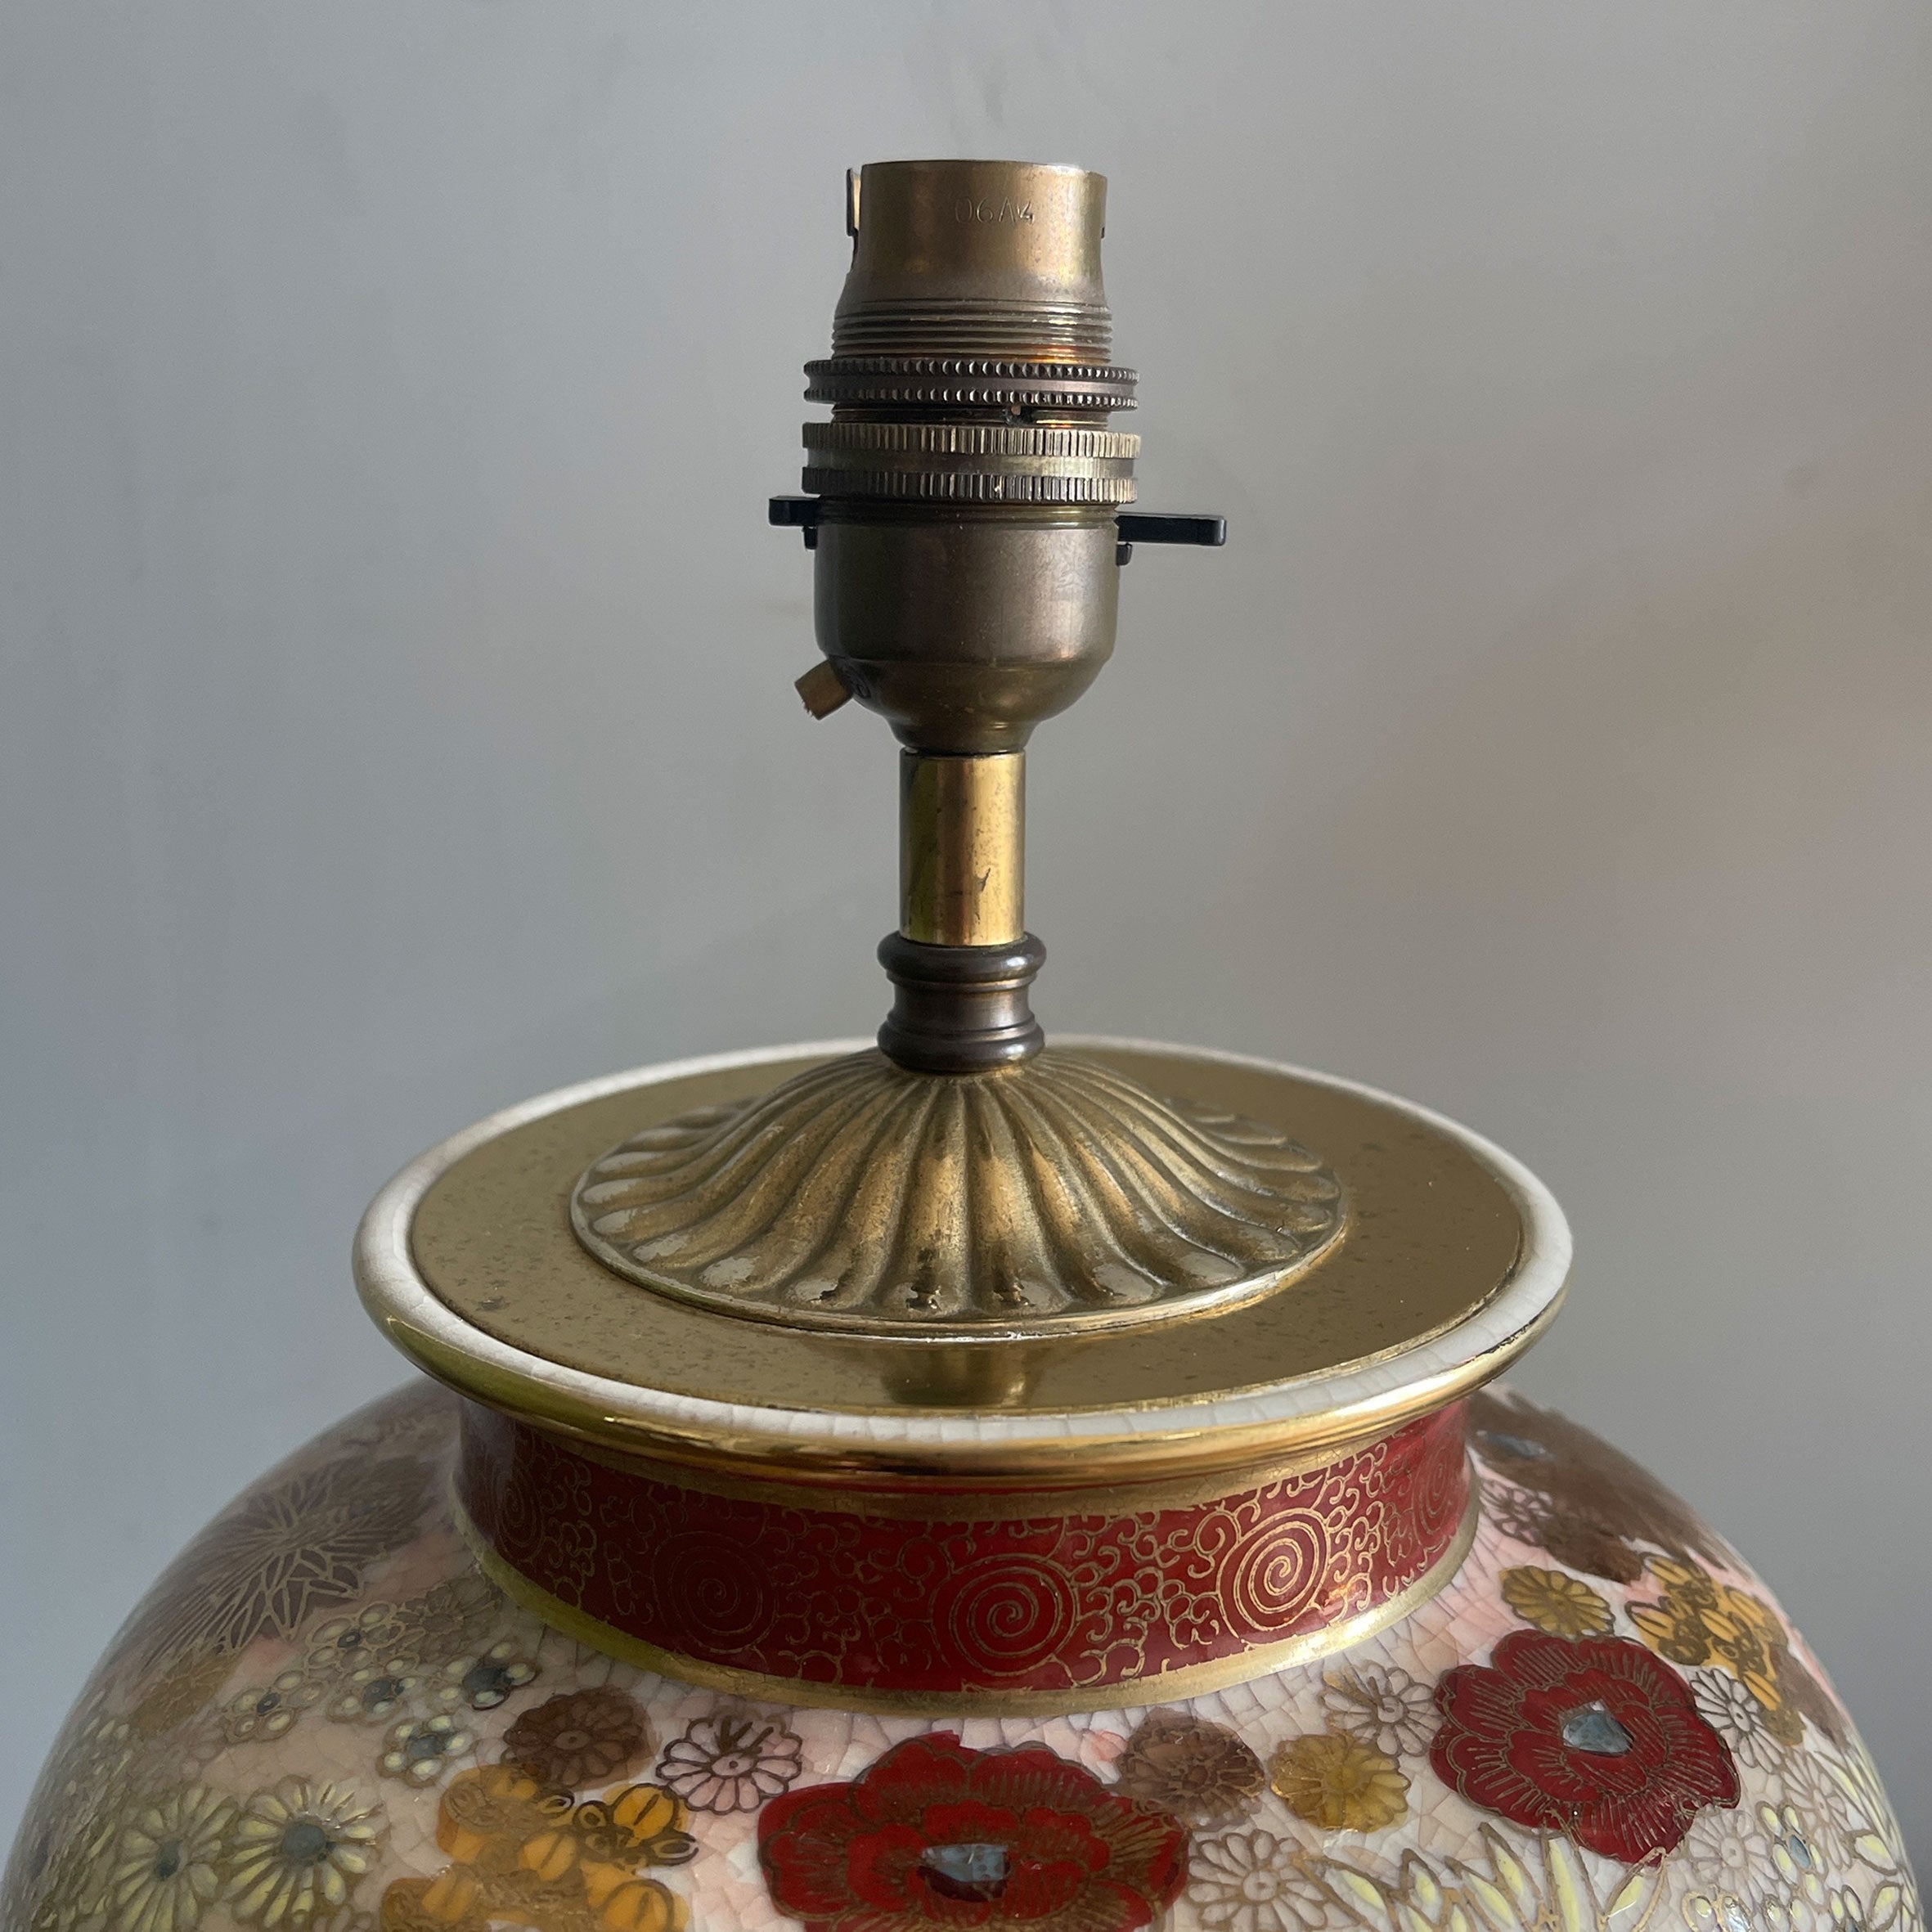 A golden toned Oriental Table Lamp. A ceramic jar with brass and wooden fittings. - SHOP NOW - www.intovintage.co.uk